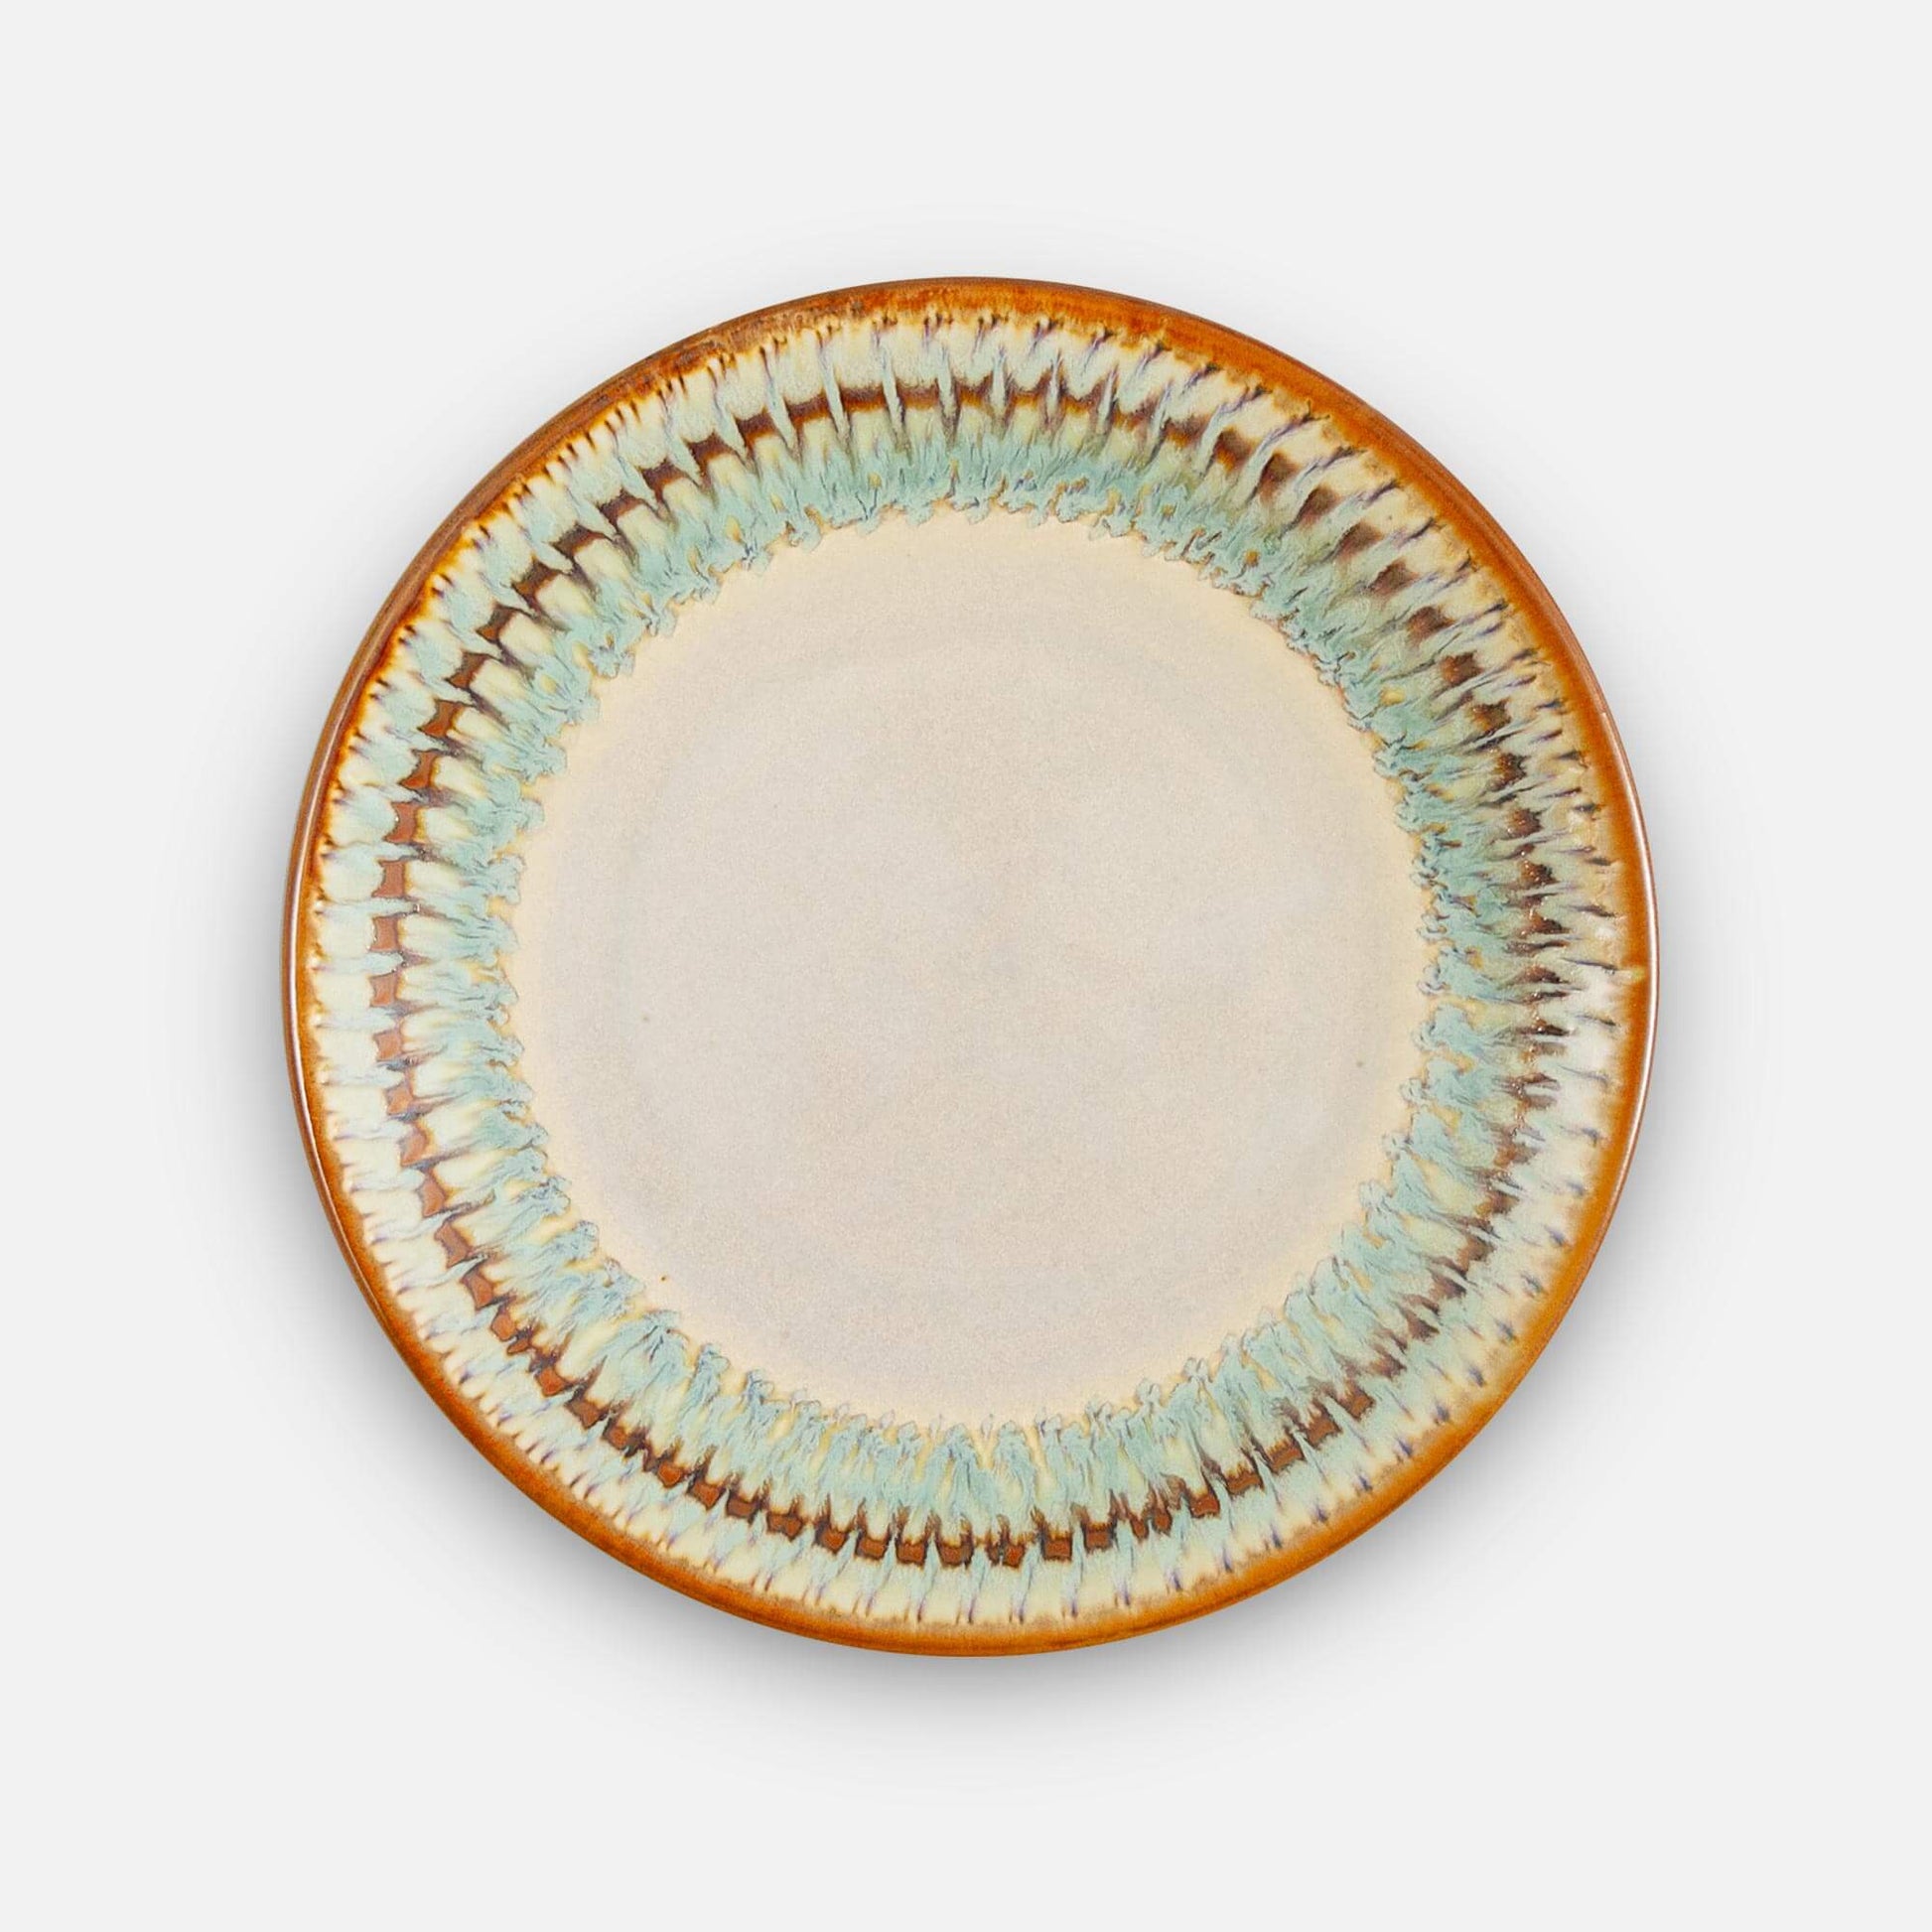 Handmade Pottery Classic Dessert Plate in Ivory & Green pattern made by Georgetown Pottery in Maine